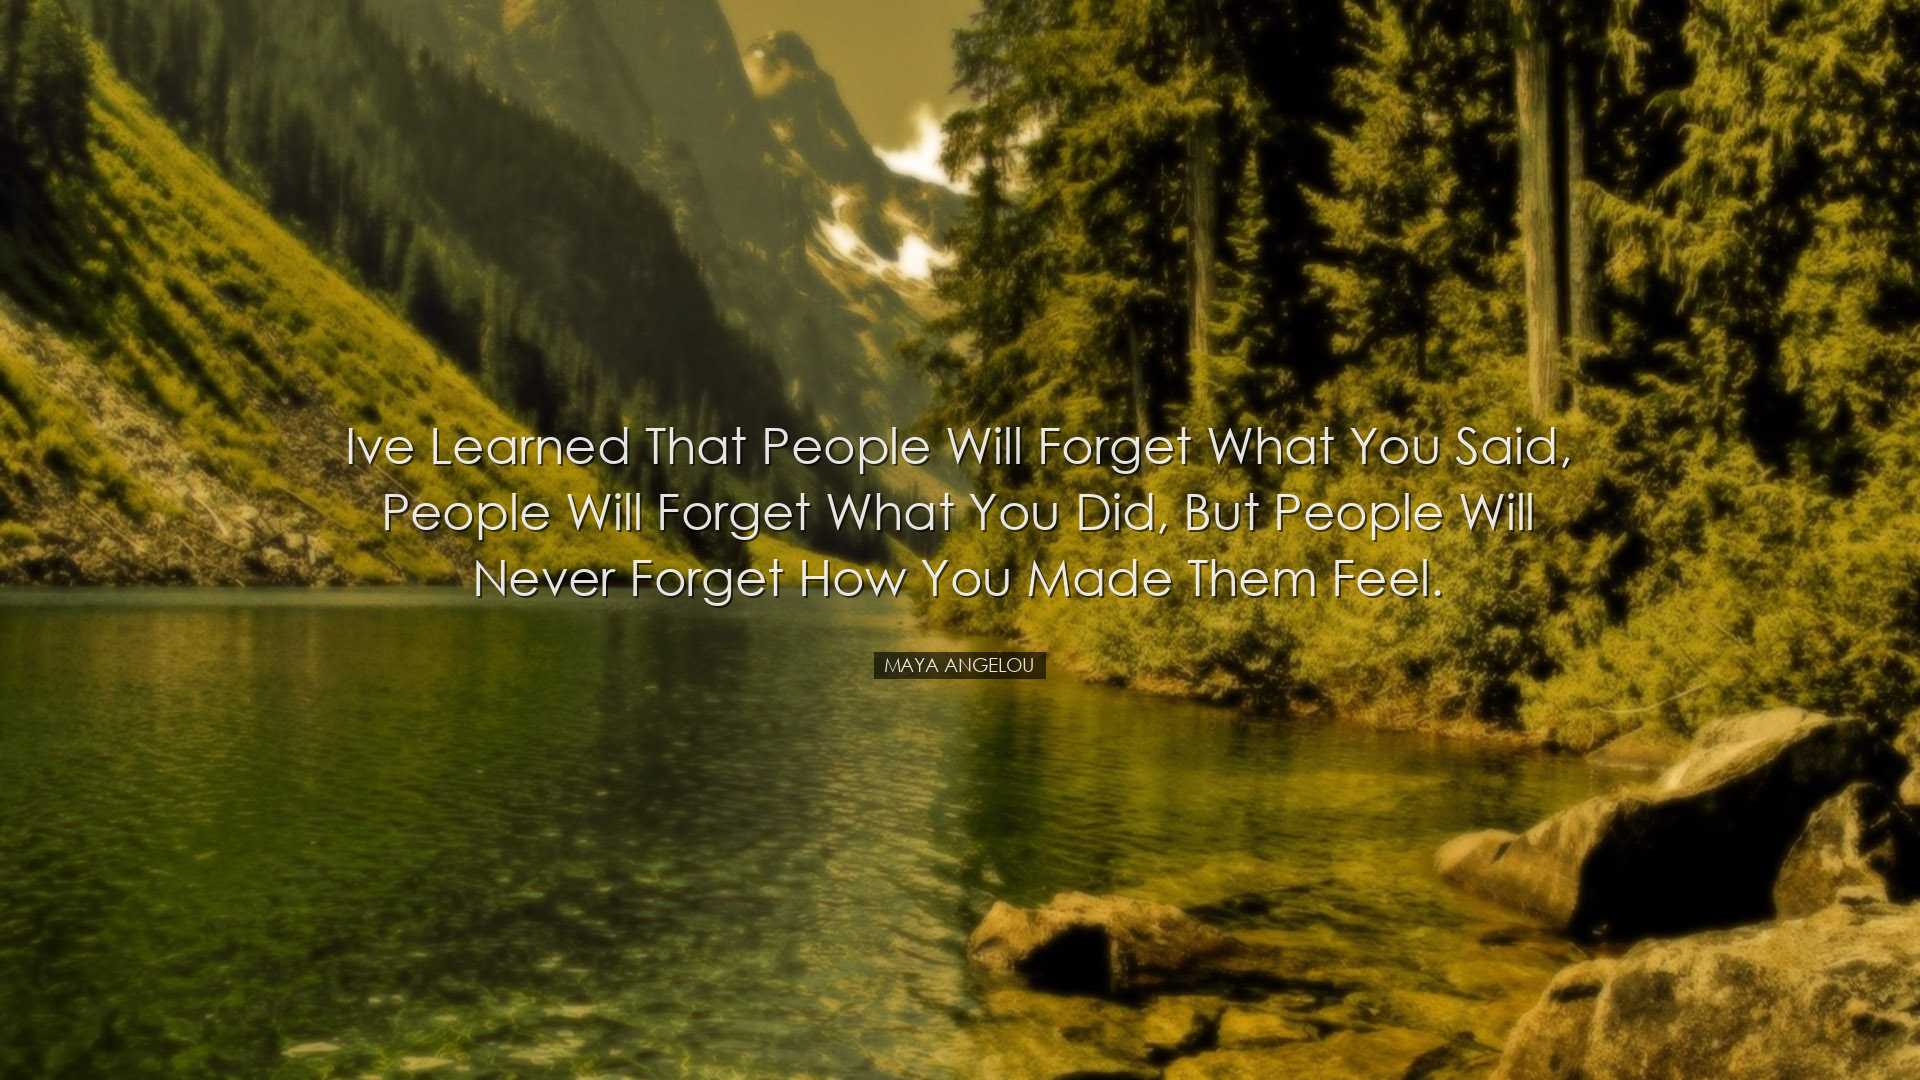 Ive learned that people will forget what you said, people will for